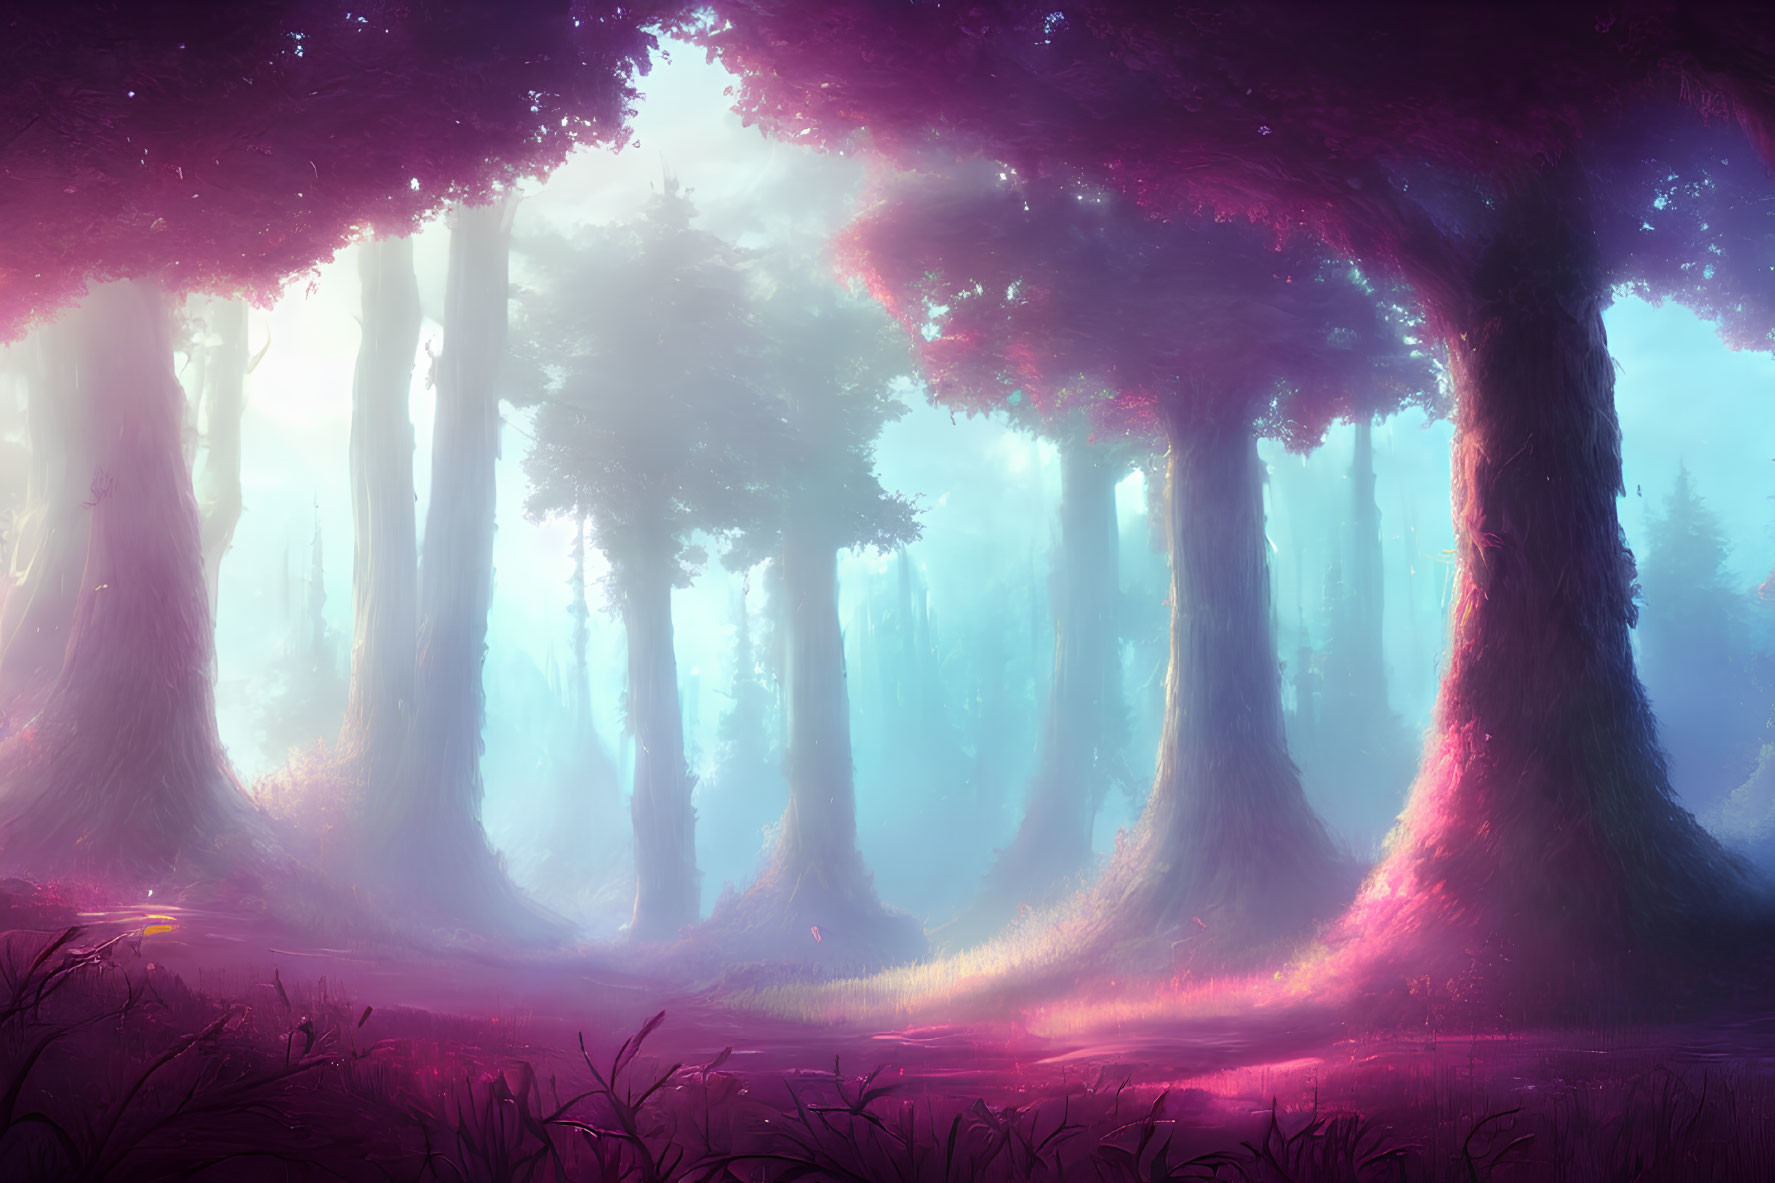 Enchanting forest scene with purple and pink hues, towering trees, and ethereal light.